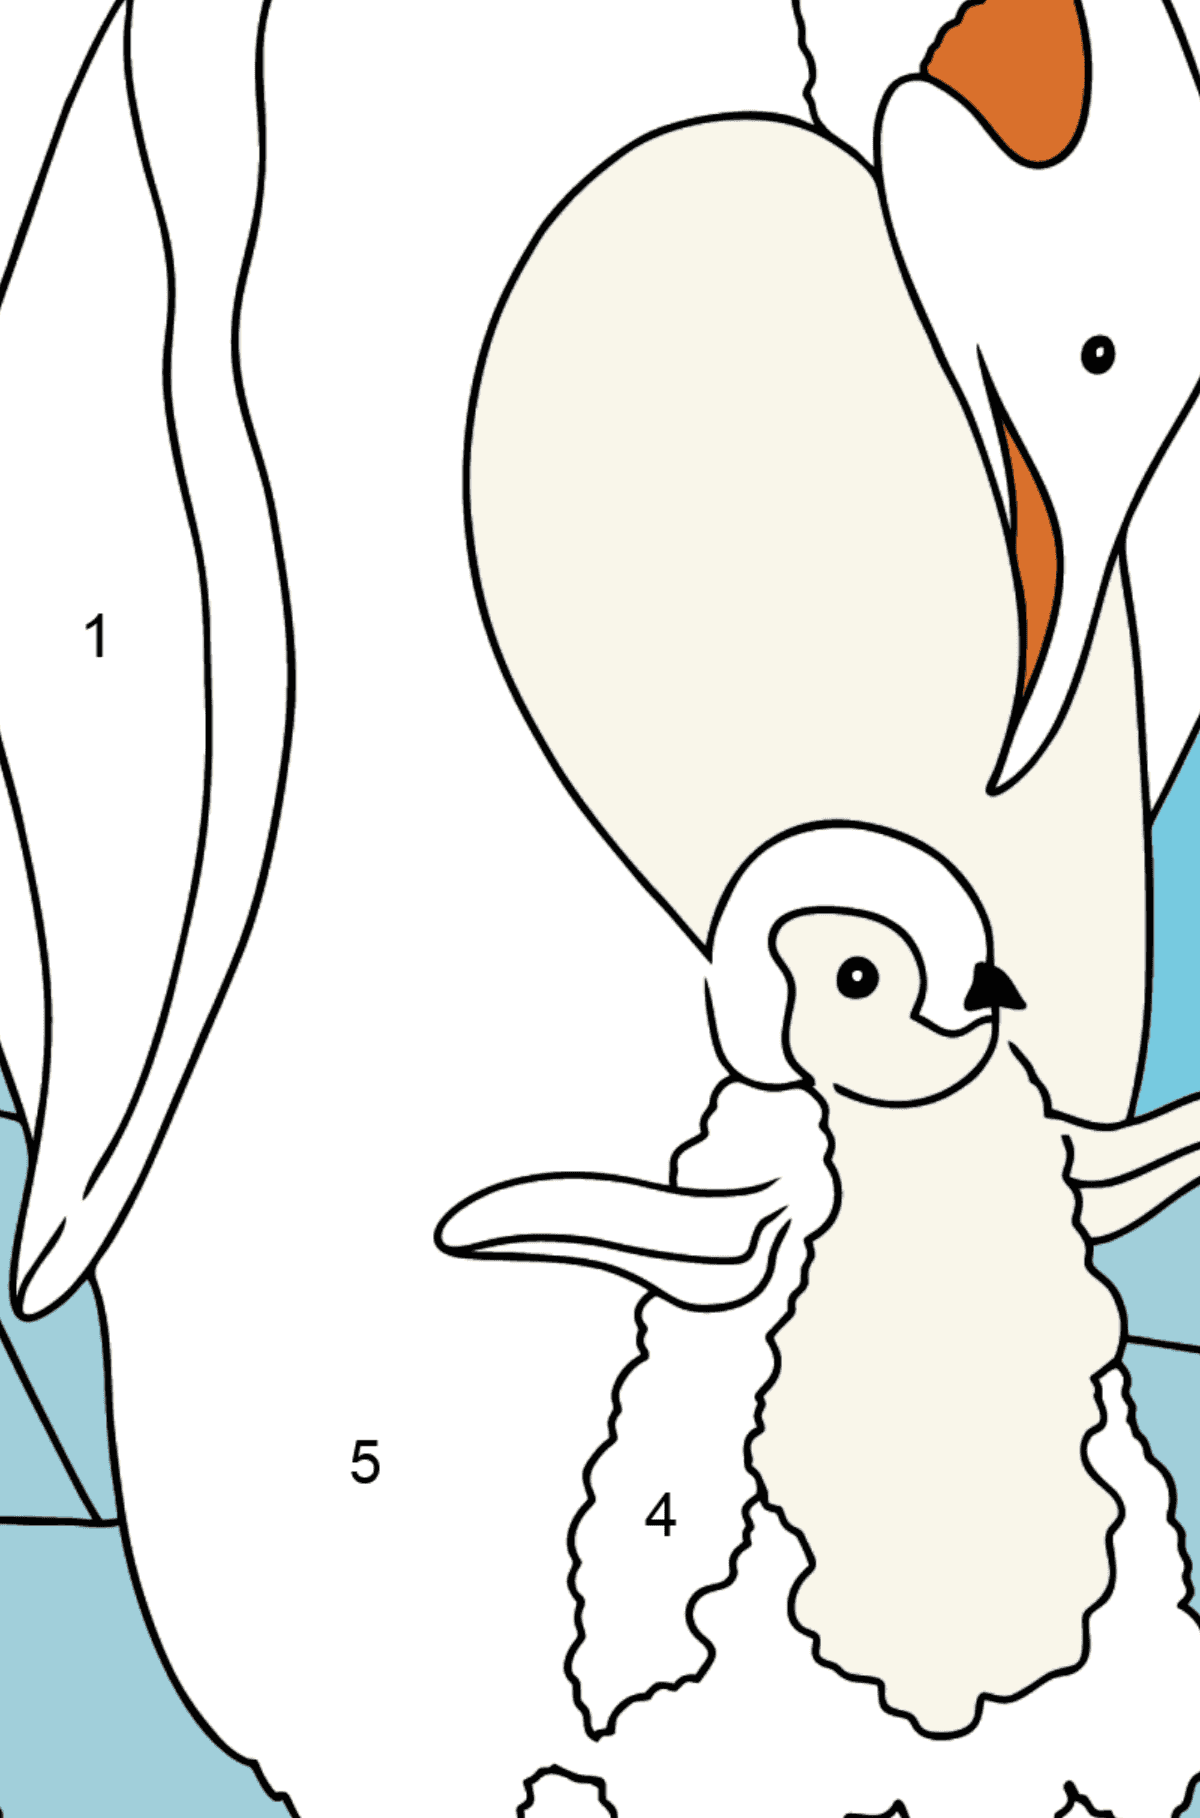 Coloring Page - A Caring Penguin - Coloring by Numbers for Kids